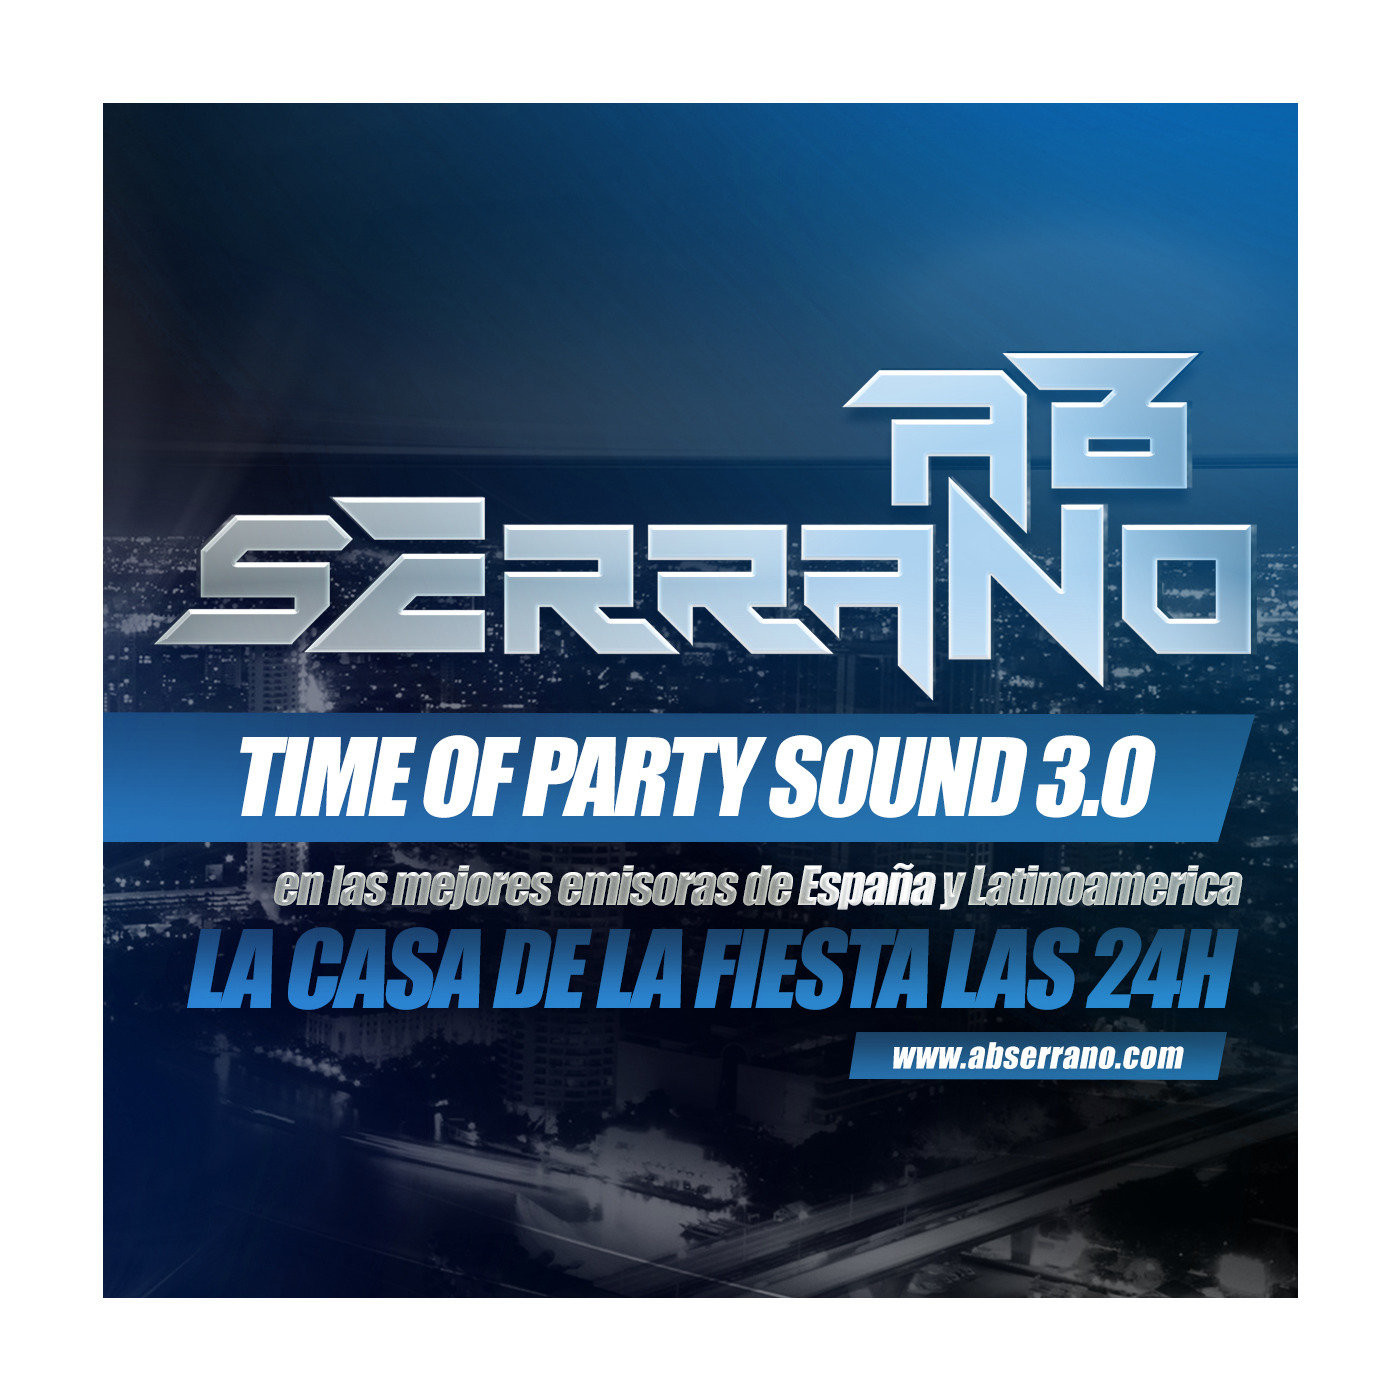 TIME OF PARTY SOUND 3.0